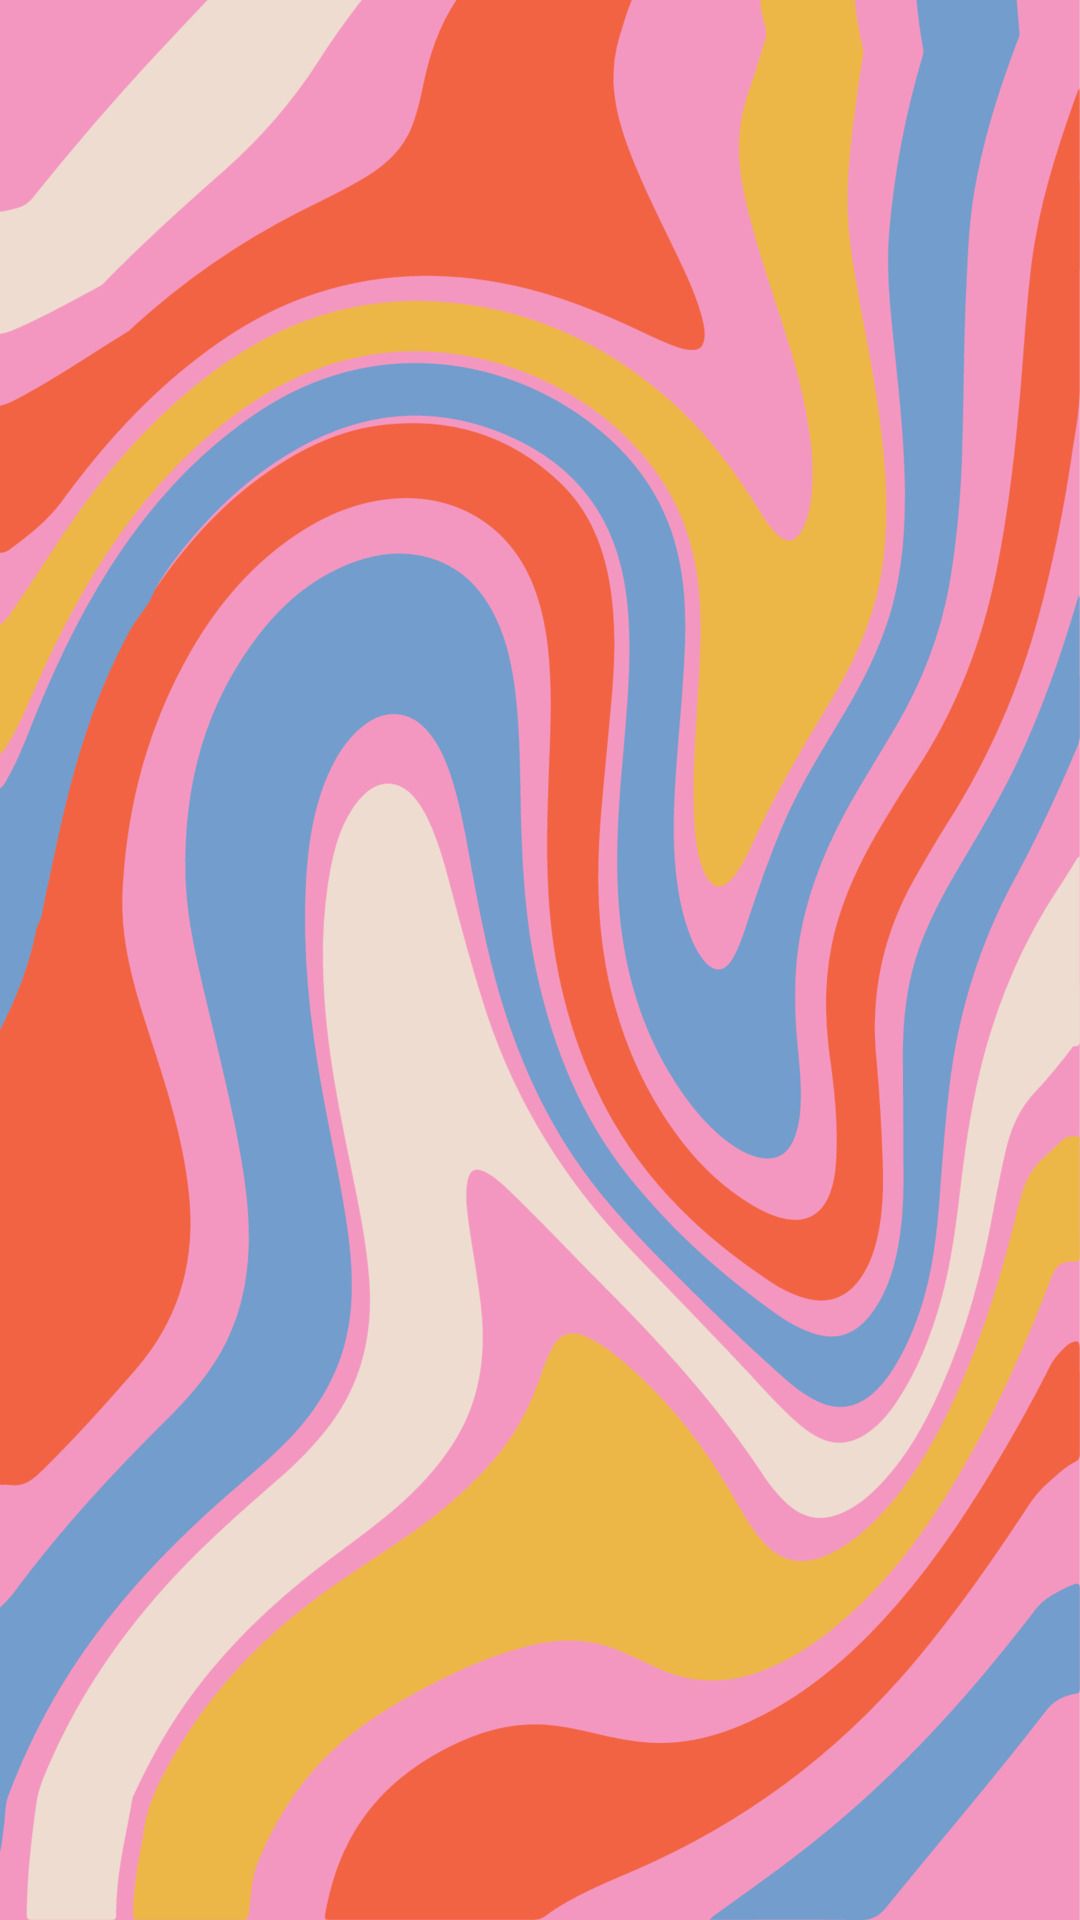 A colorful swirl of pink, blue, yellow, and orange. - 70s